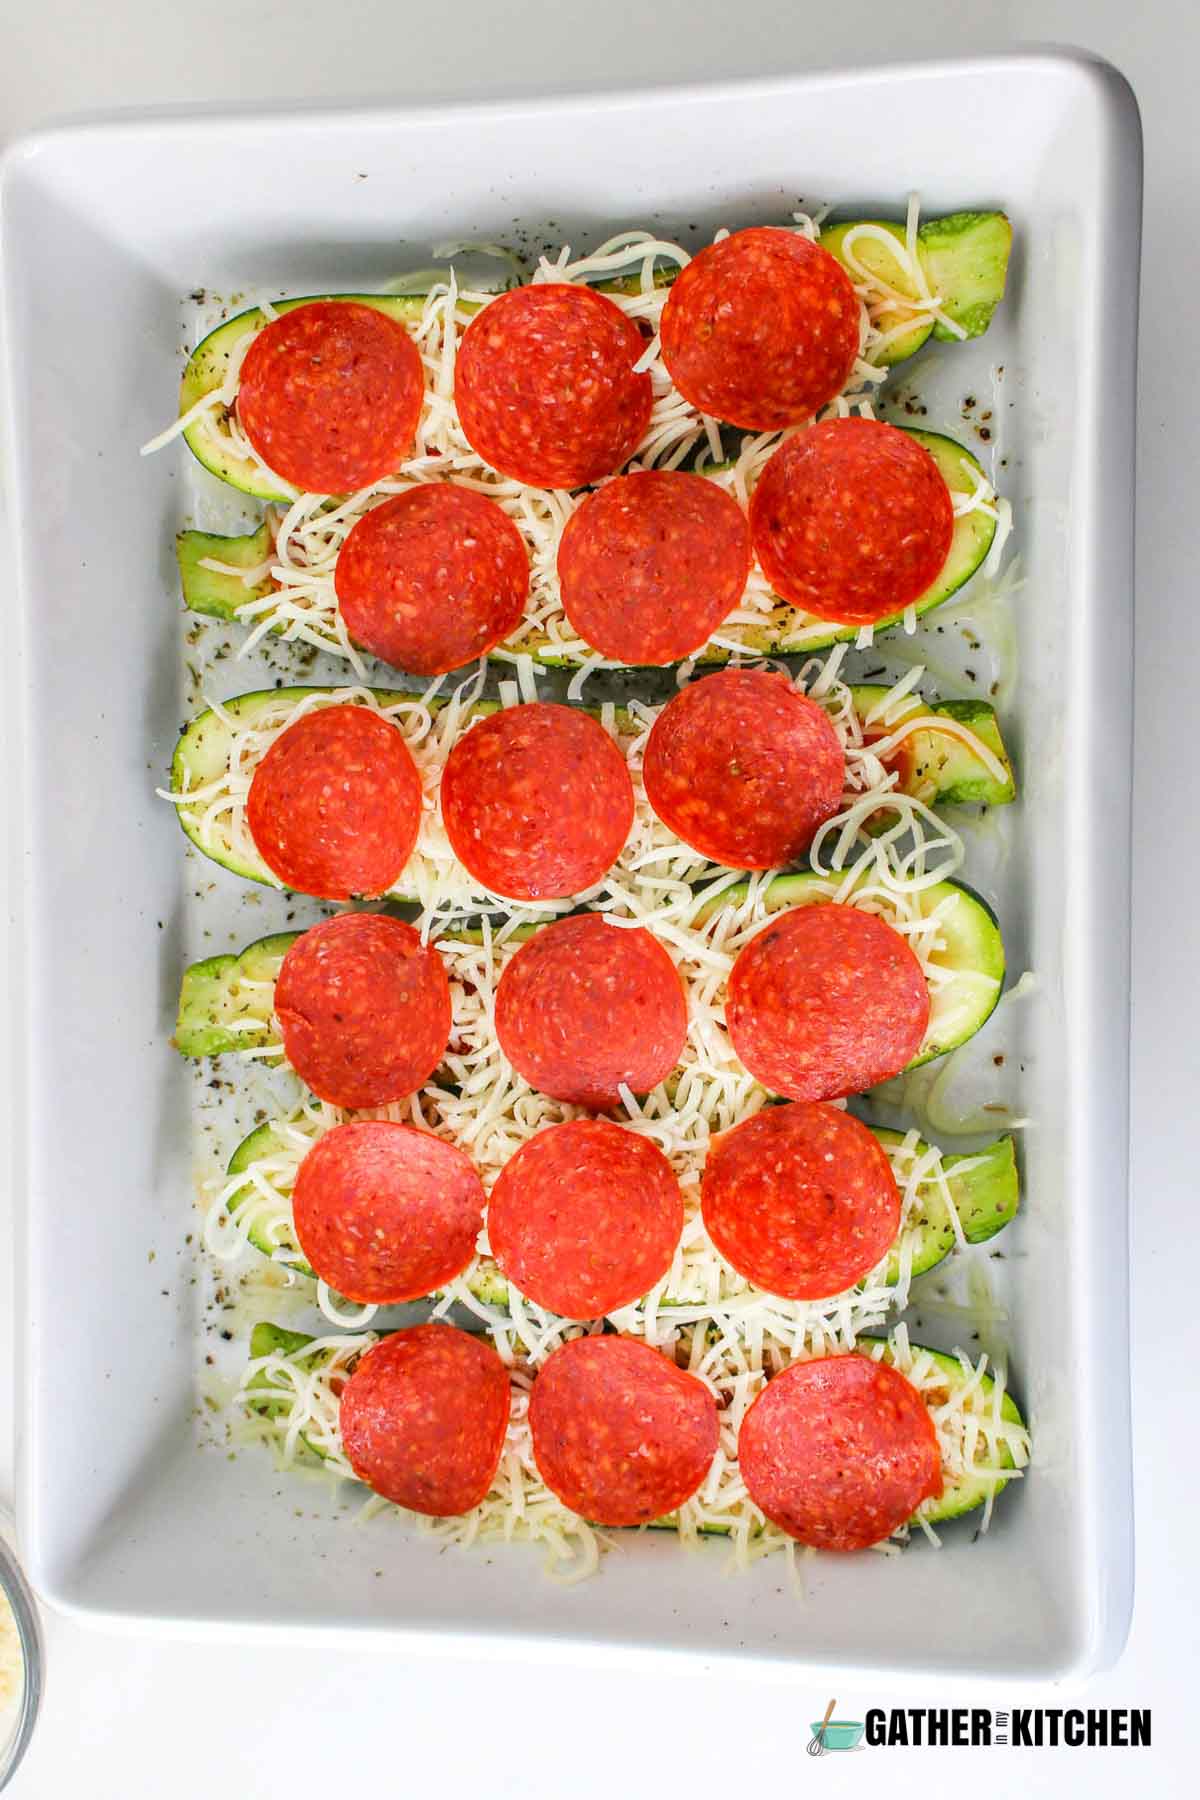 Pepperoni added on top of cheese.